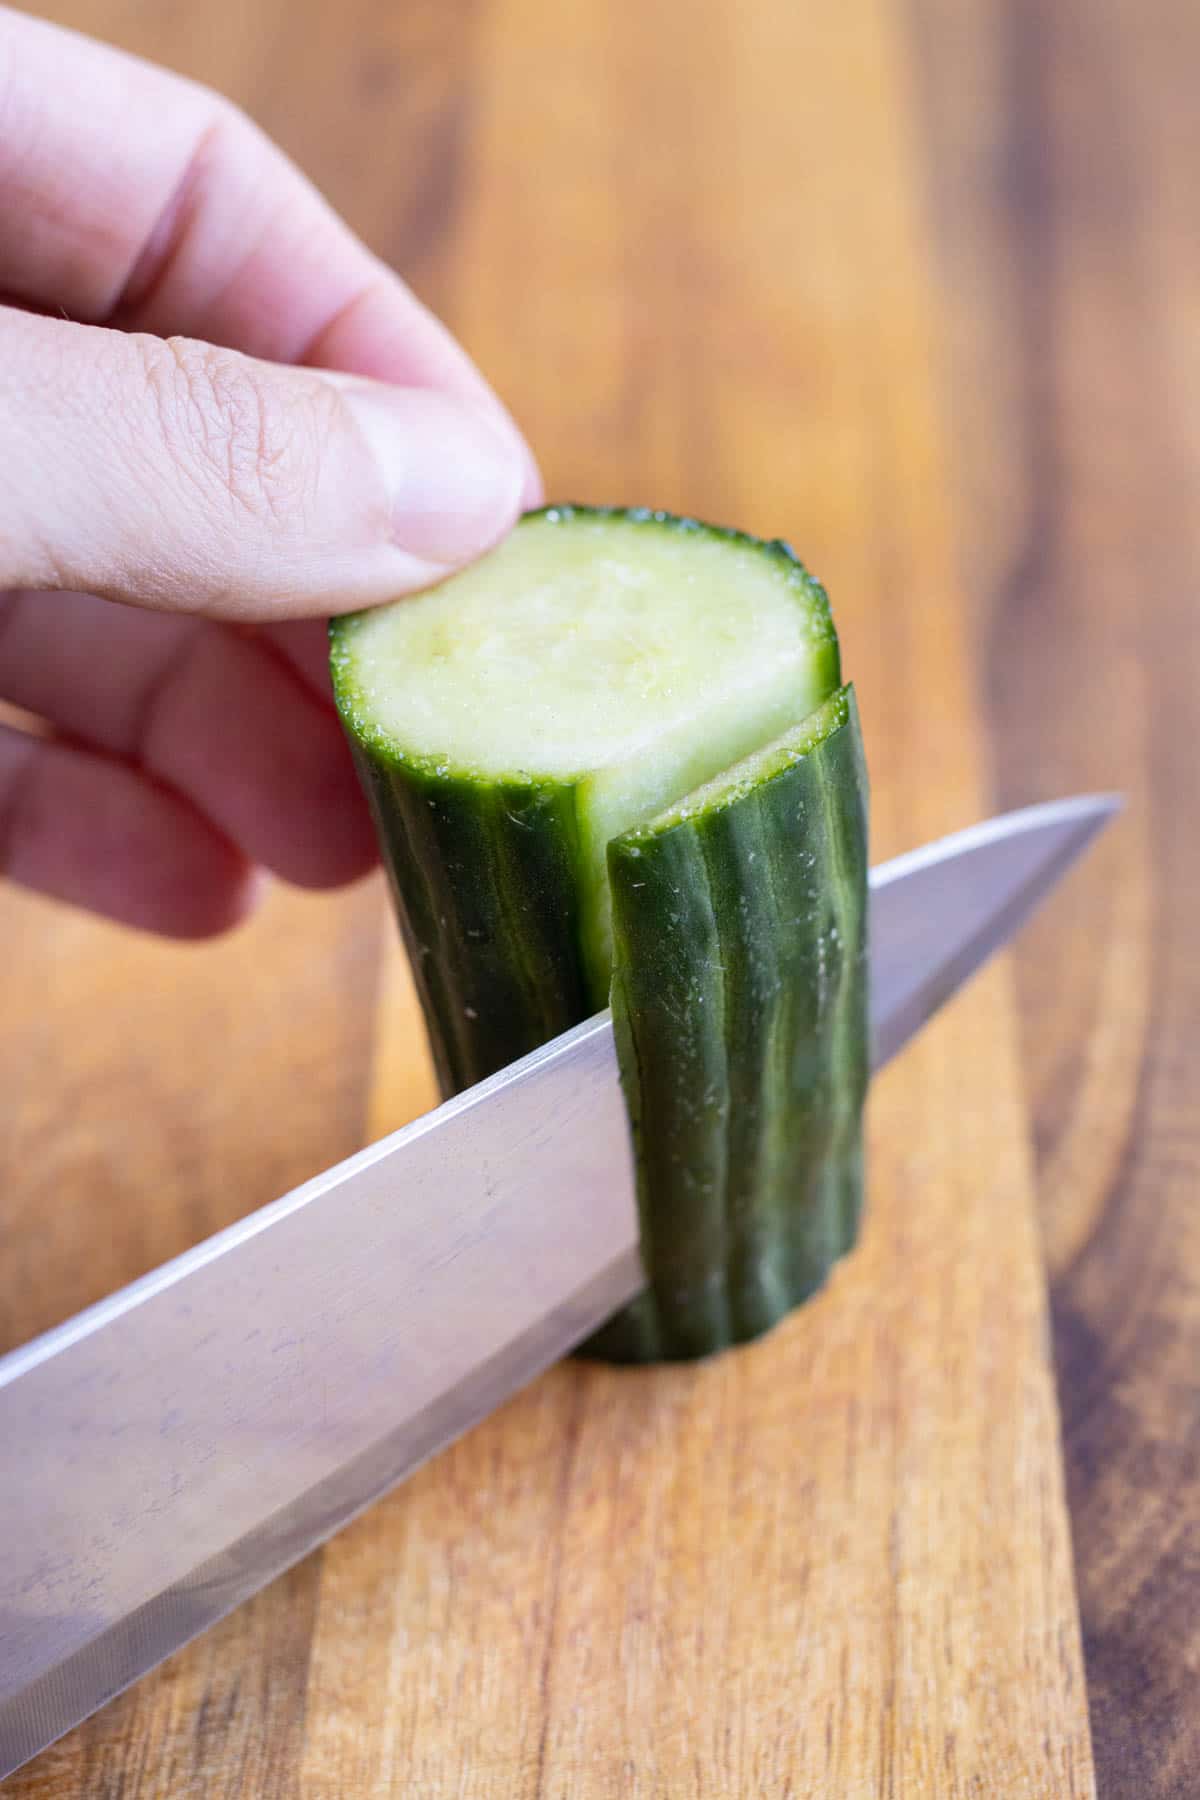 A cucumber is trimmed and peeled.